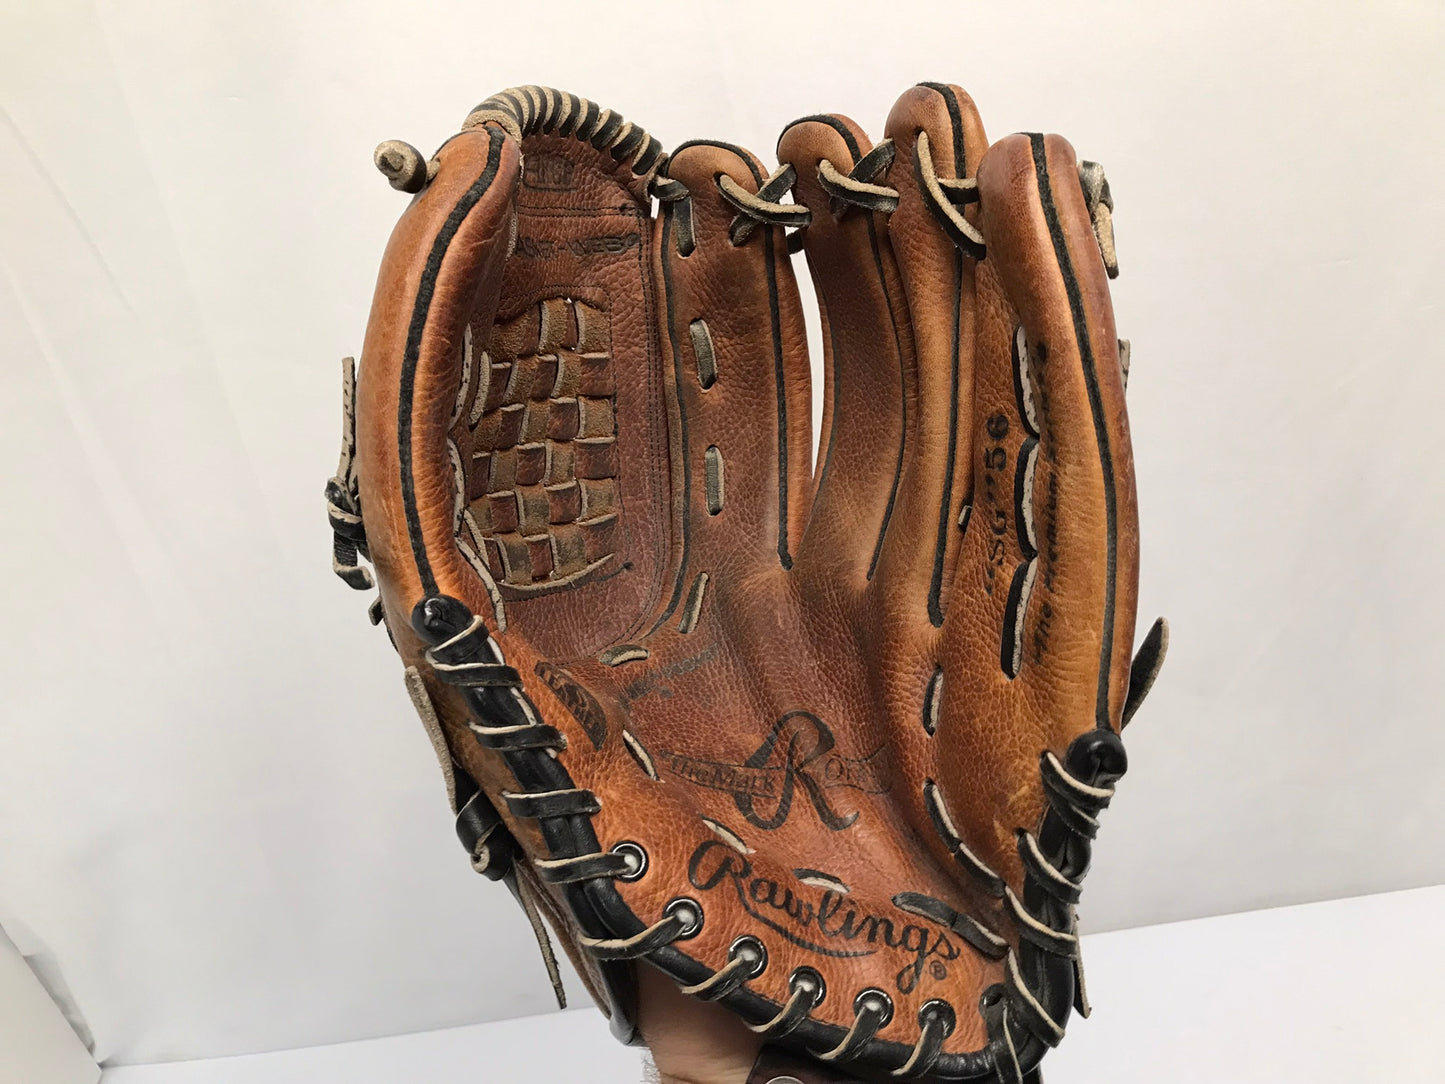 Baseball Glove Adult Size 13 inch Rawlings Premium Brown Leather Fits Left Hand